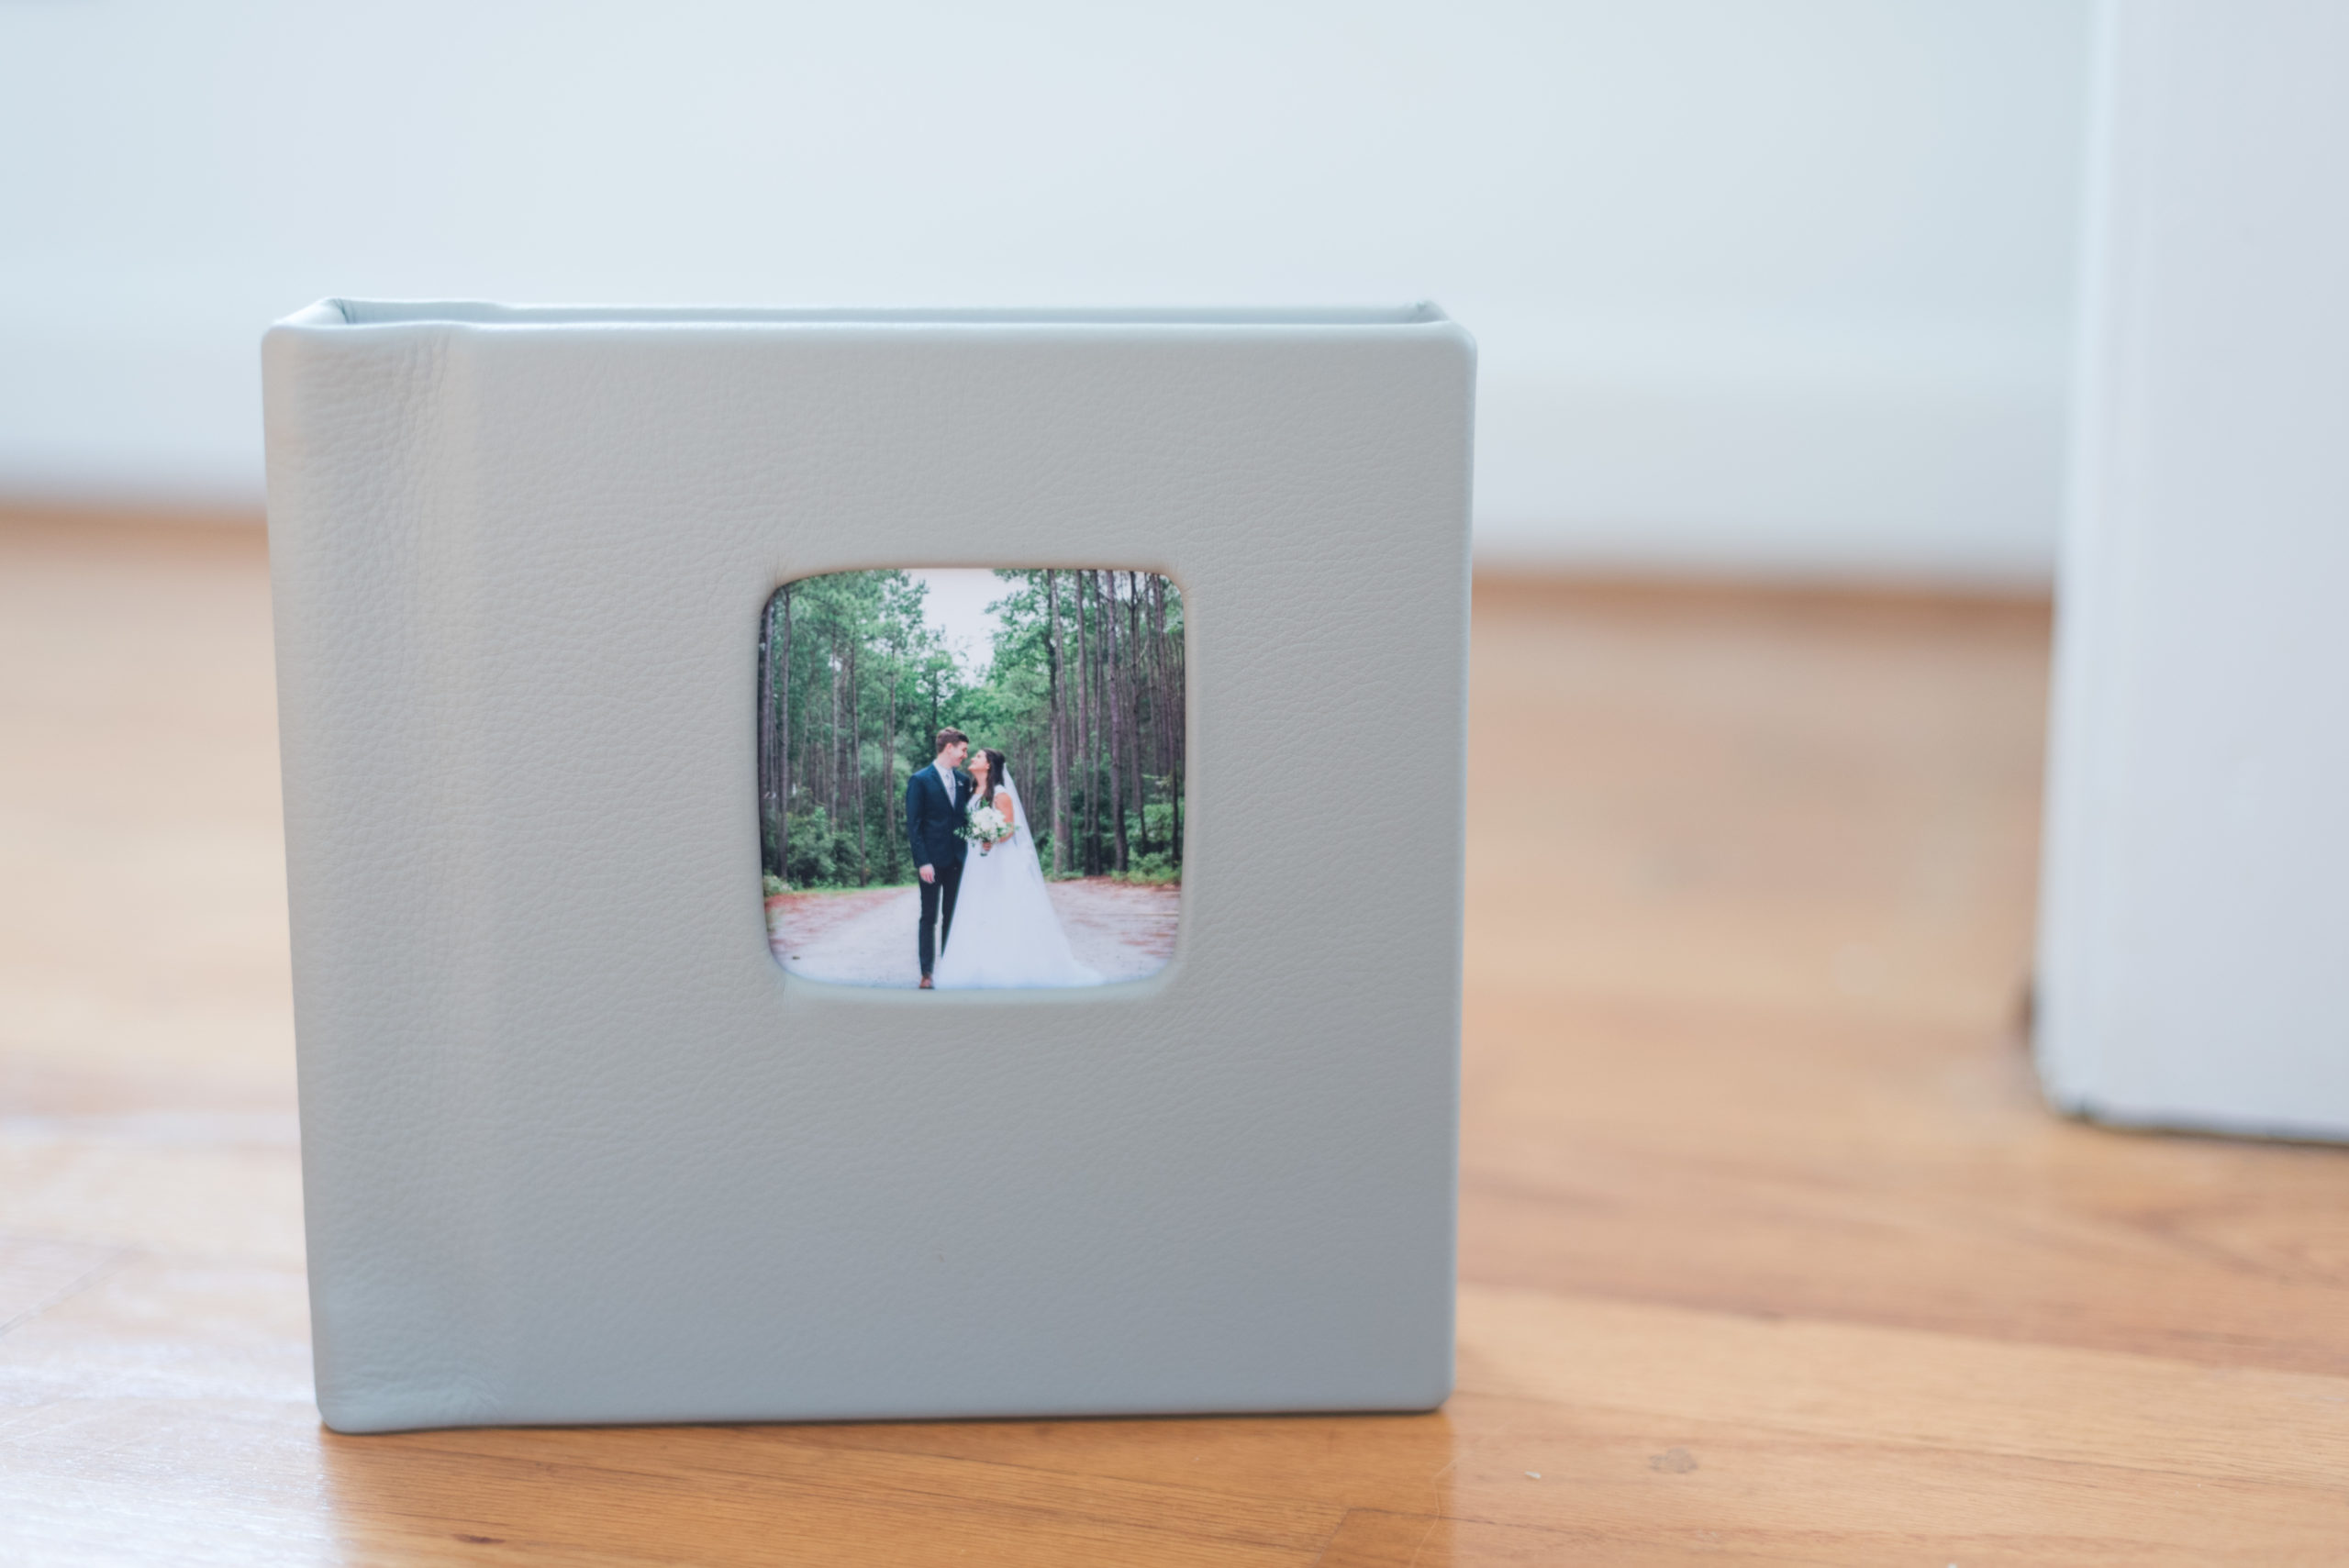 A gray, leather-bound wedding album with a cutout on the front showcasing a wedding photo on the front